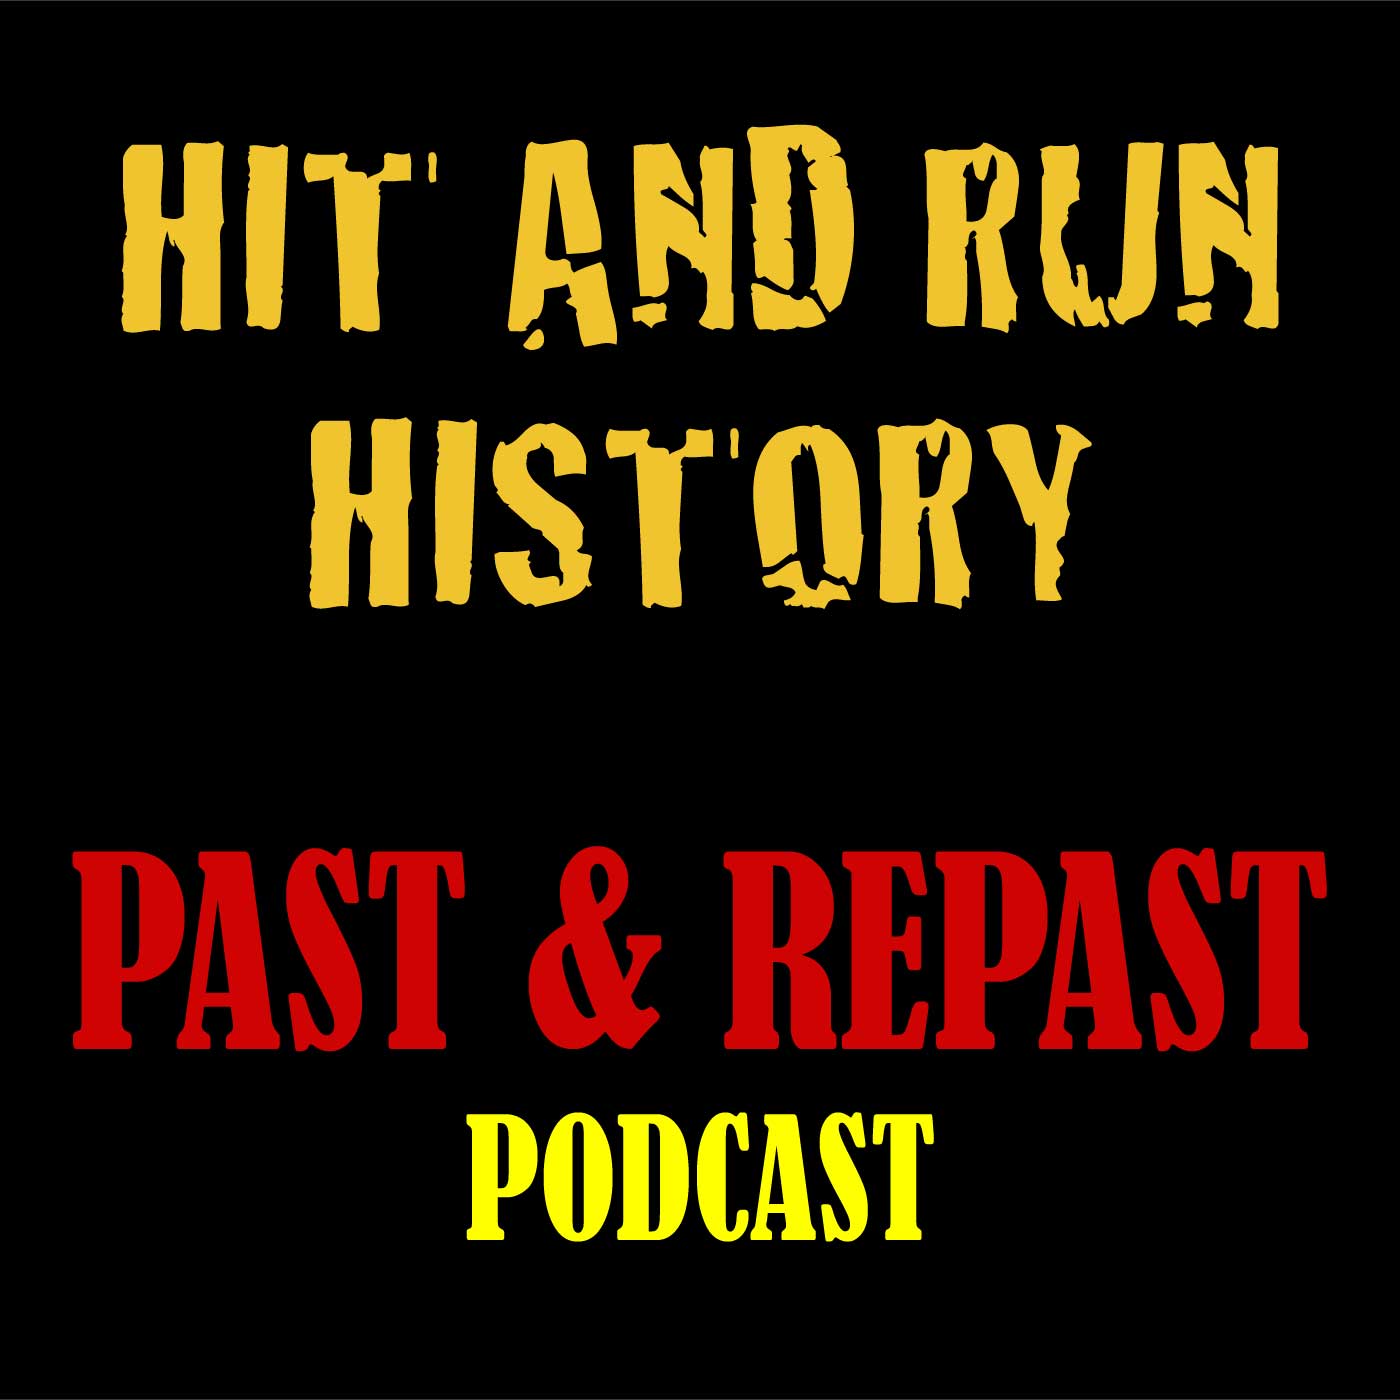 Past and Repast Podcast artwork